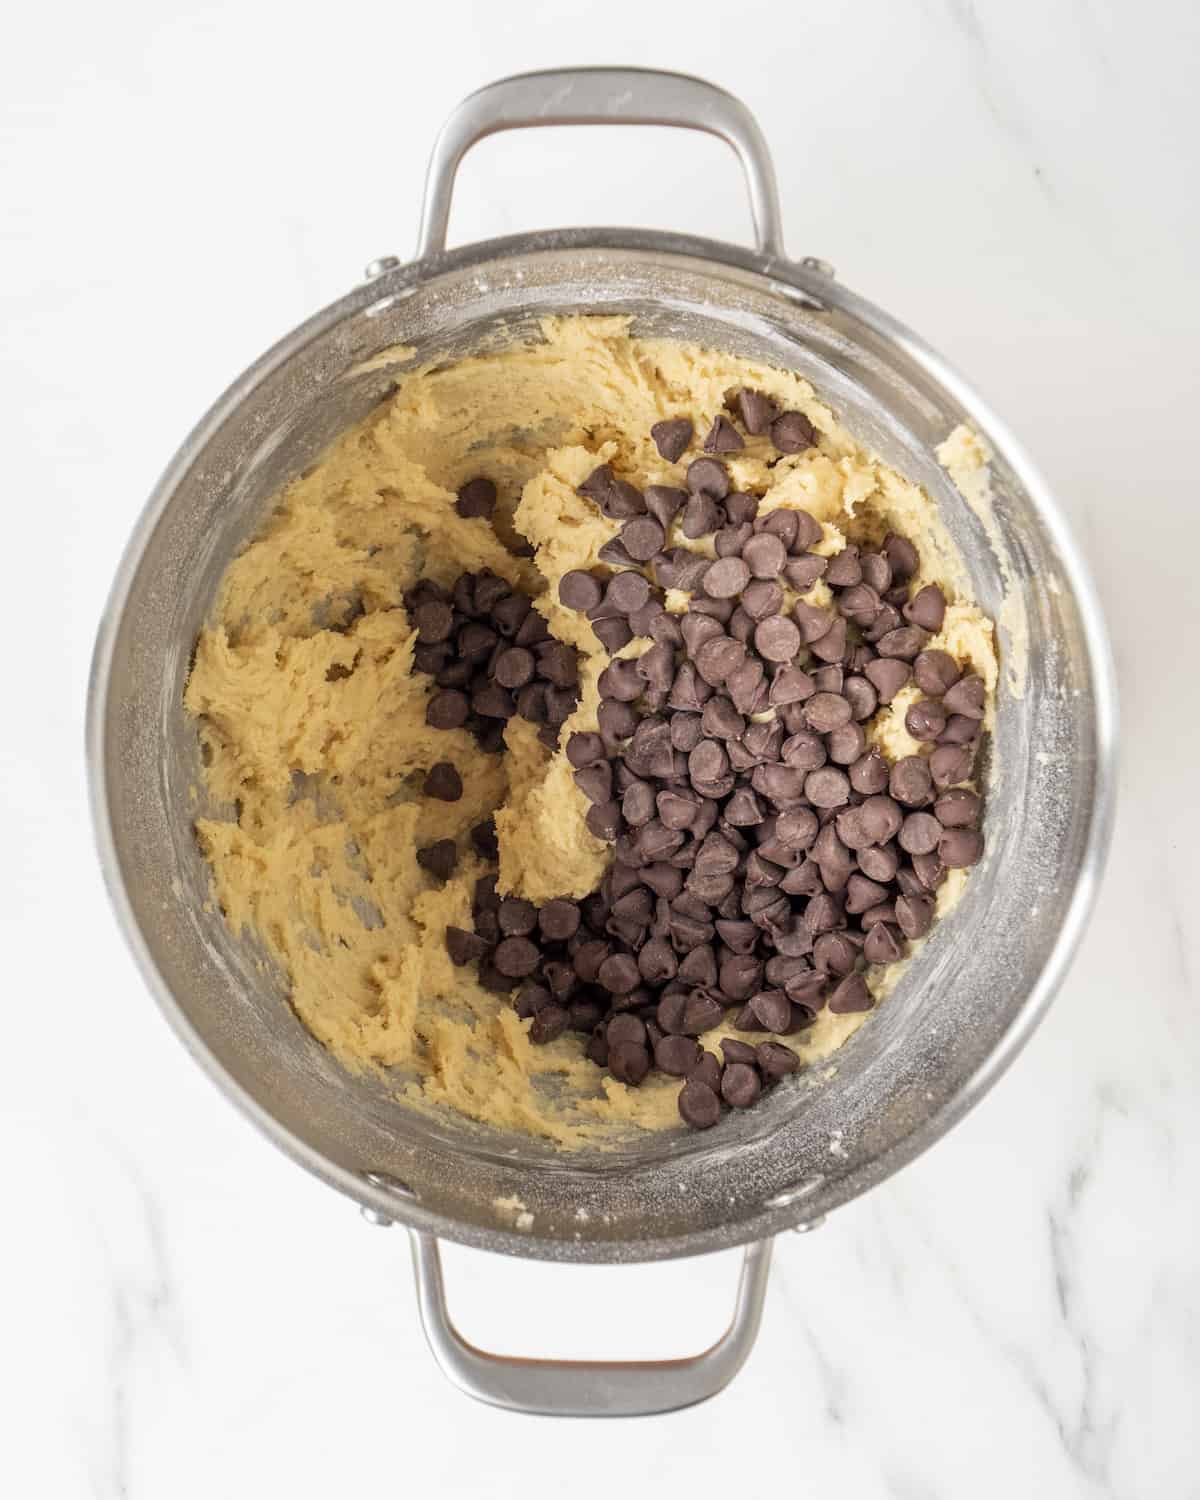 A bowl filled with cookie dough and chocolate chips.  